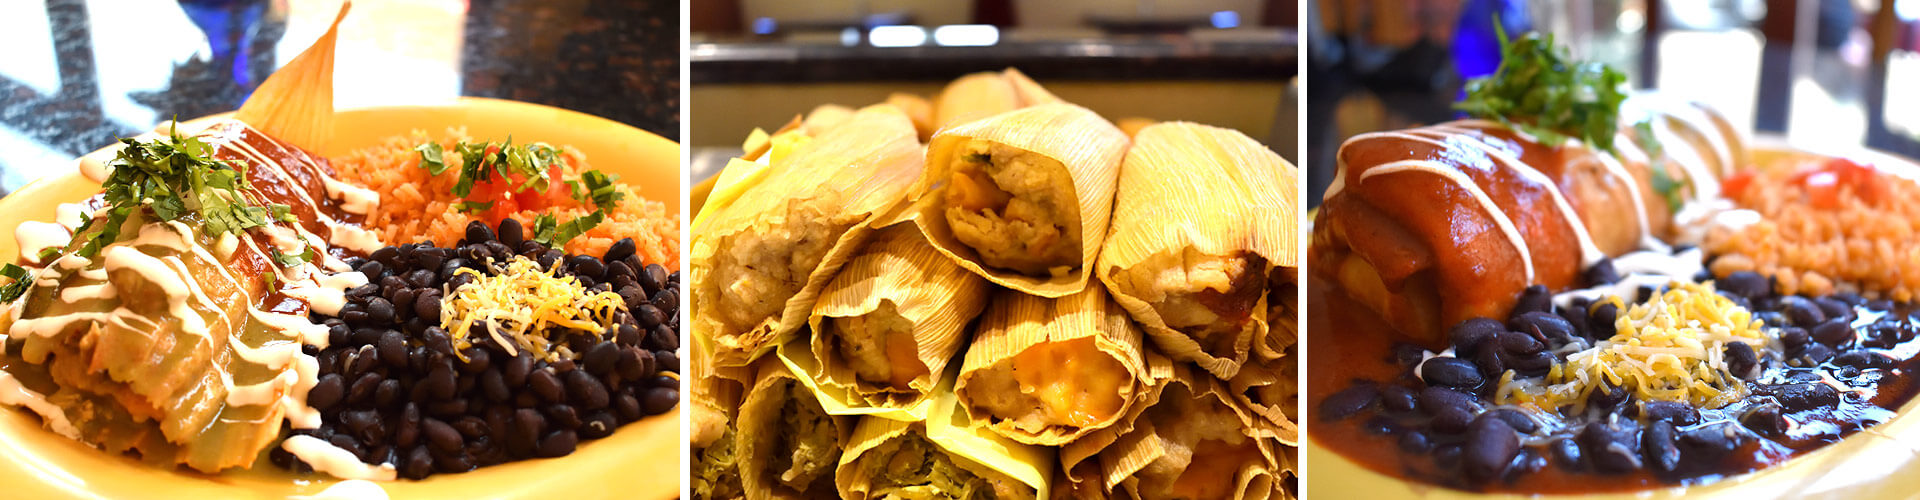 Tamale Factory Authentic Mexican Food Catering Banquets in Riverside